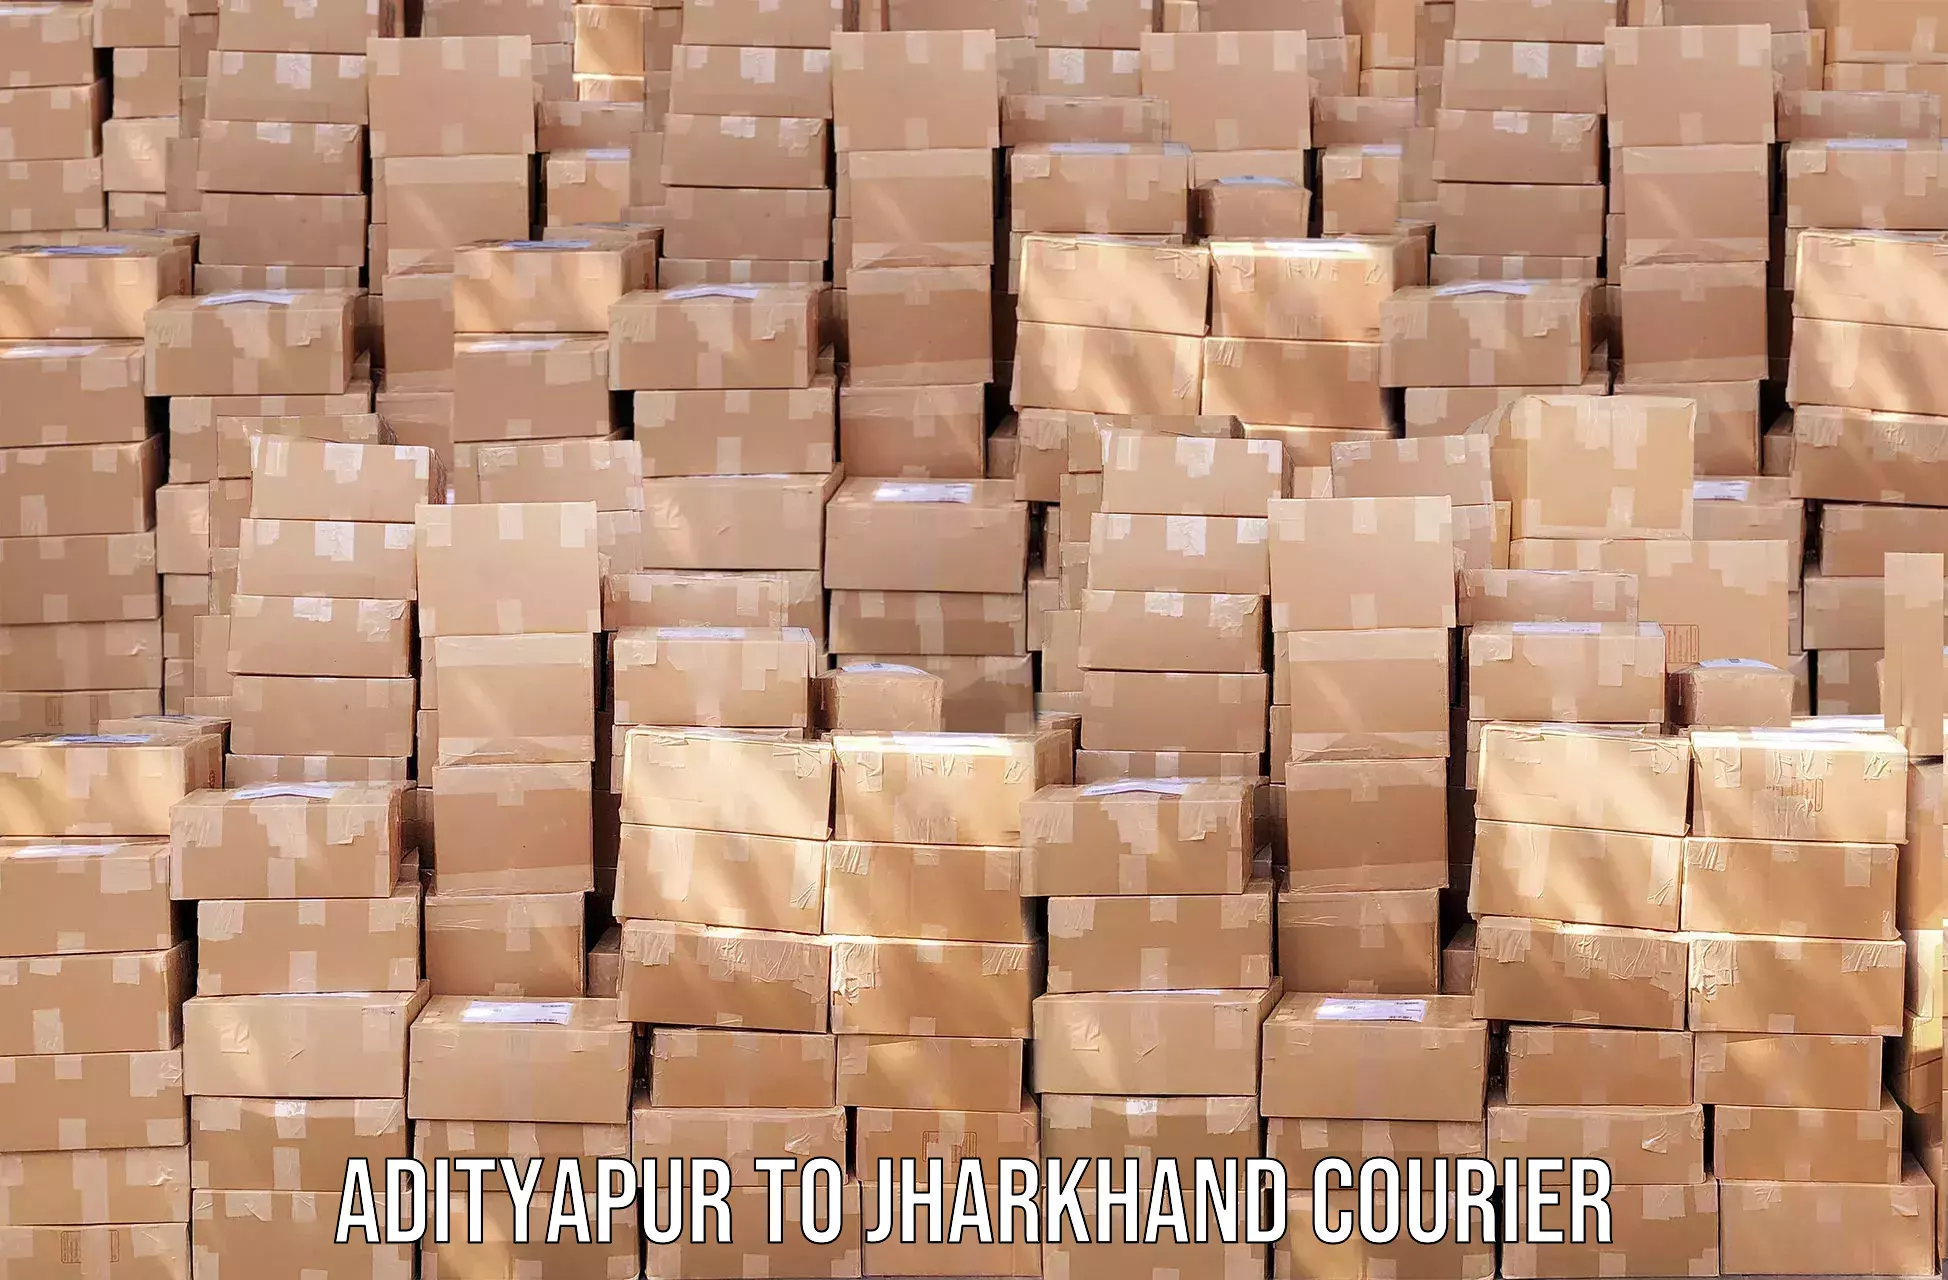 Courier service partnerships in Adityapur to Chouparan